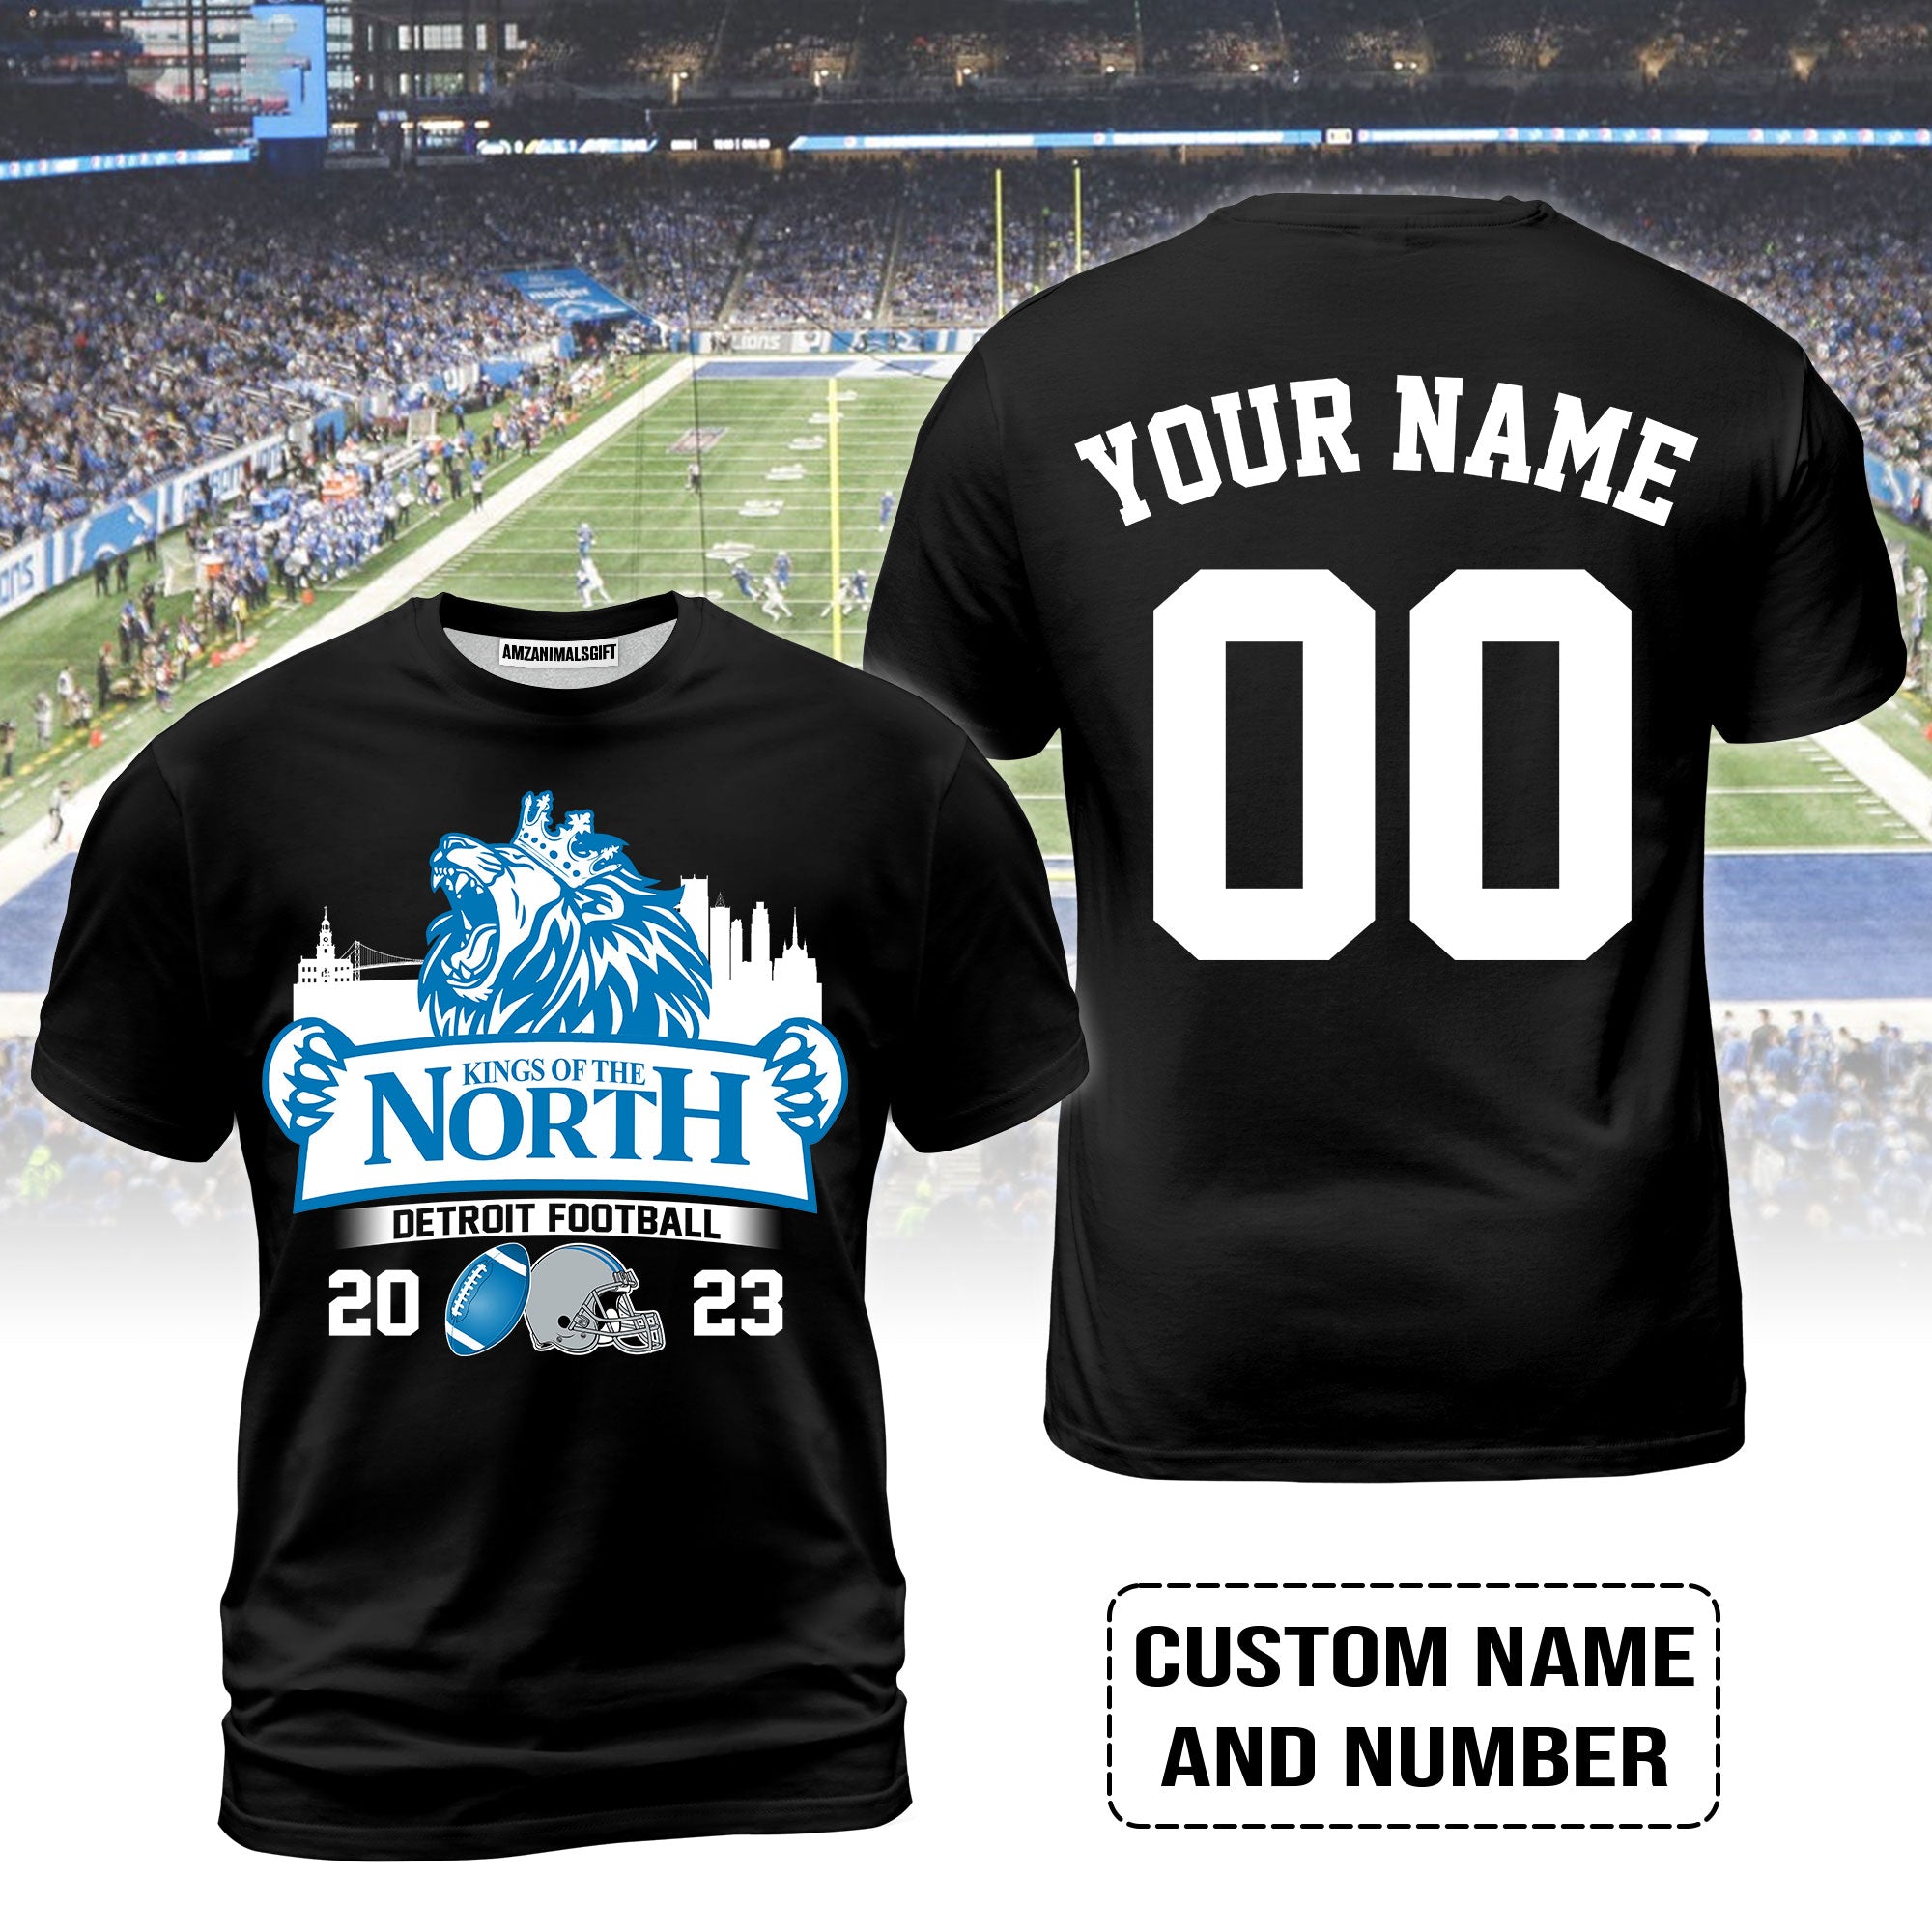 Detroit Football King Of The North 2023 Customized T-Shirts, Conquered The North NFC North Champions T-Shirt, Detroit Football Fan Gifts